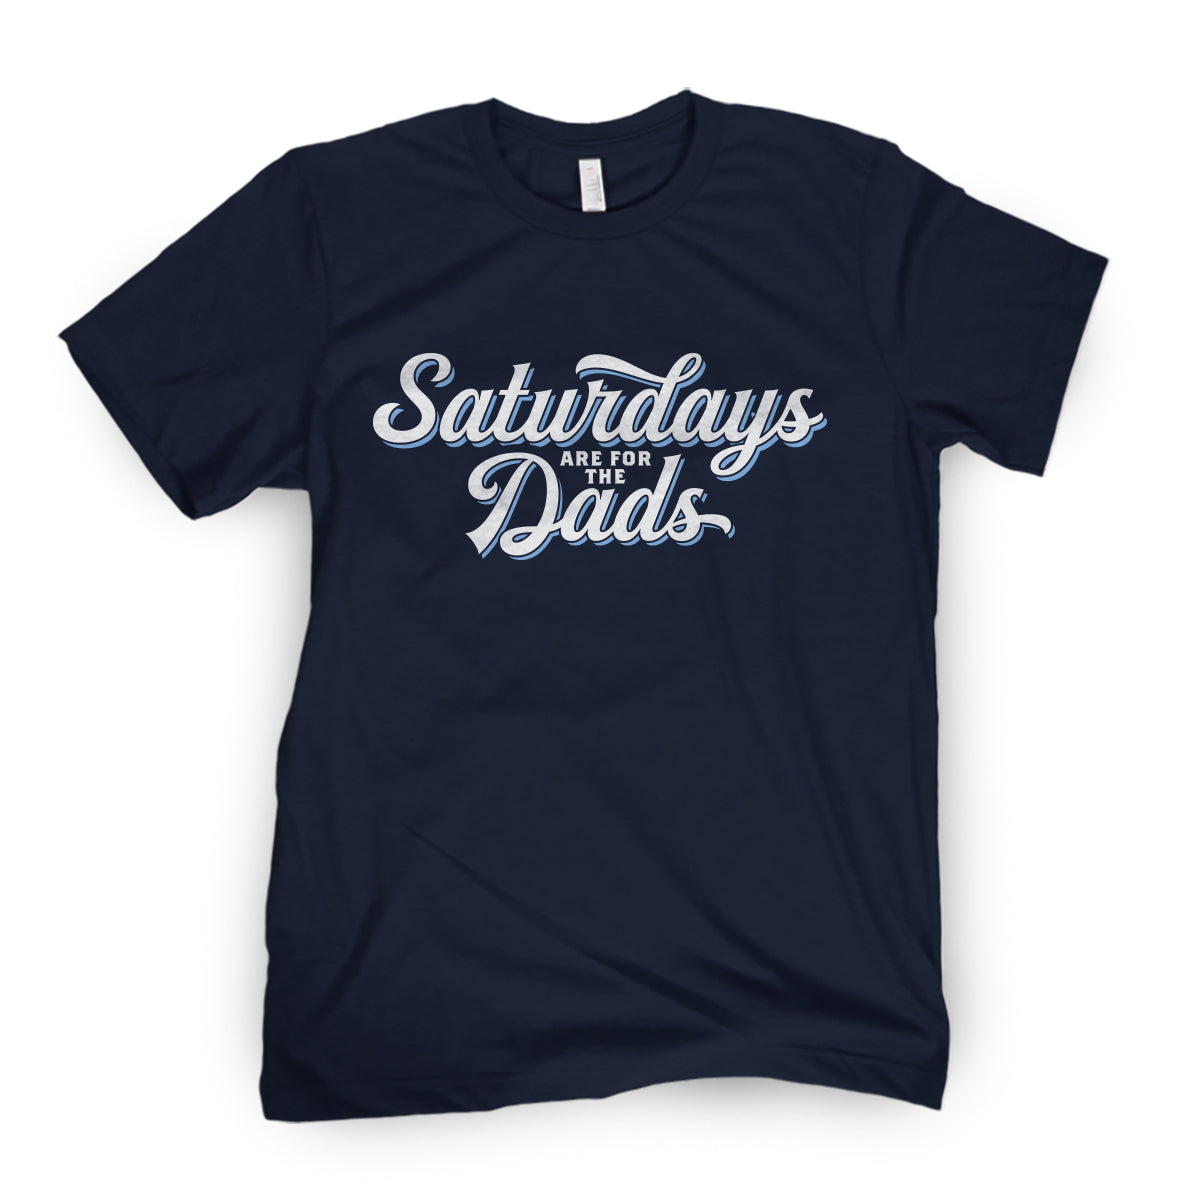 Saturdays Are For The Dads Script Tee